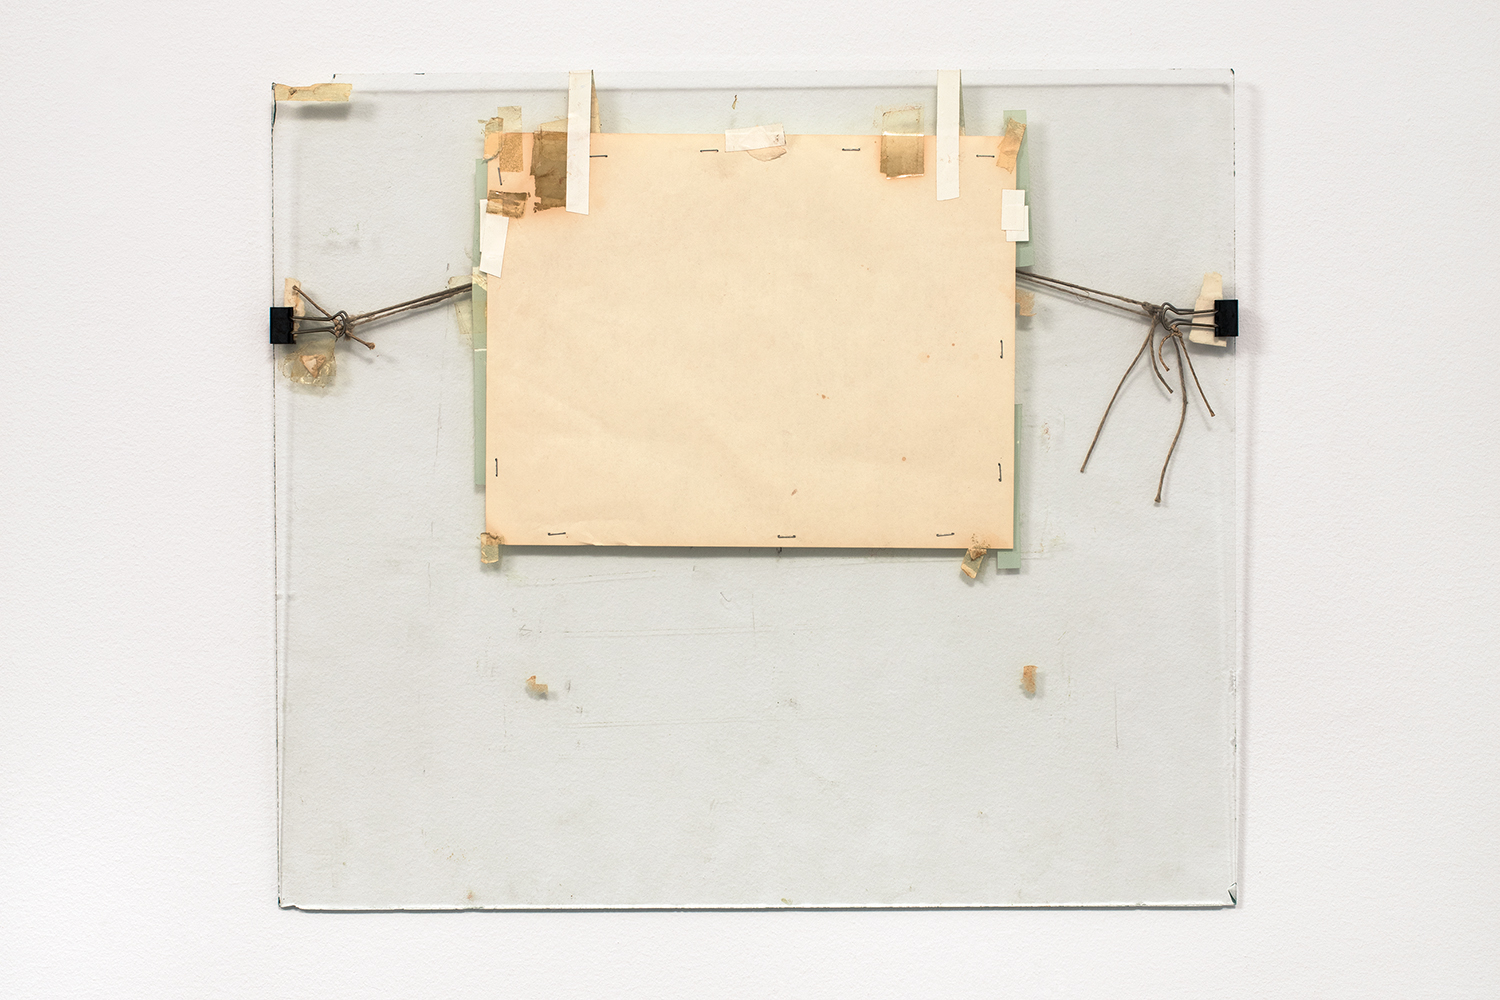  Nahum Tevet, Untitled #5, 1972. Paper, binder clips, twine, staples, plastic tape, masking tape, transparent tape, and wax pencil on glass, 17 3/16 x 19 3/4 x 7/16 in. (43.7 x 50.2 x 1.1 cm). Collection of the artist. Photo by Polite Photographic, c